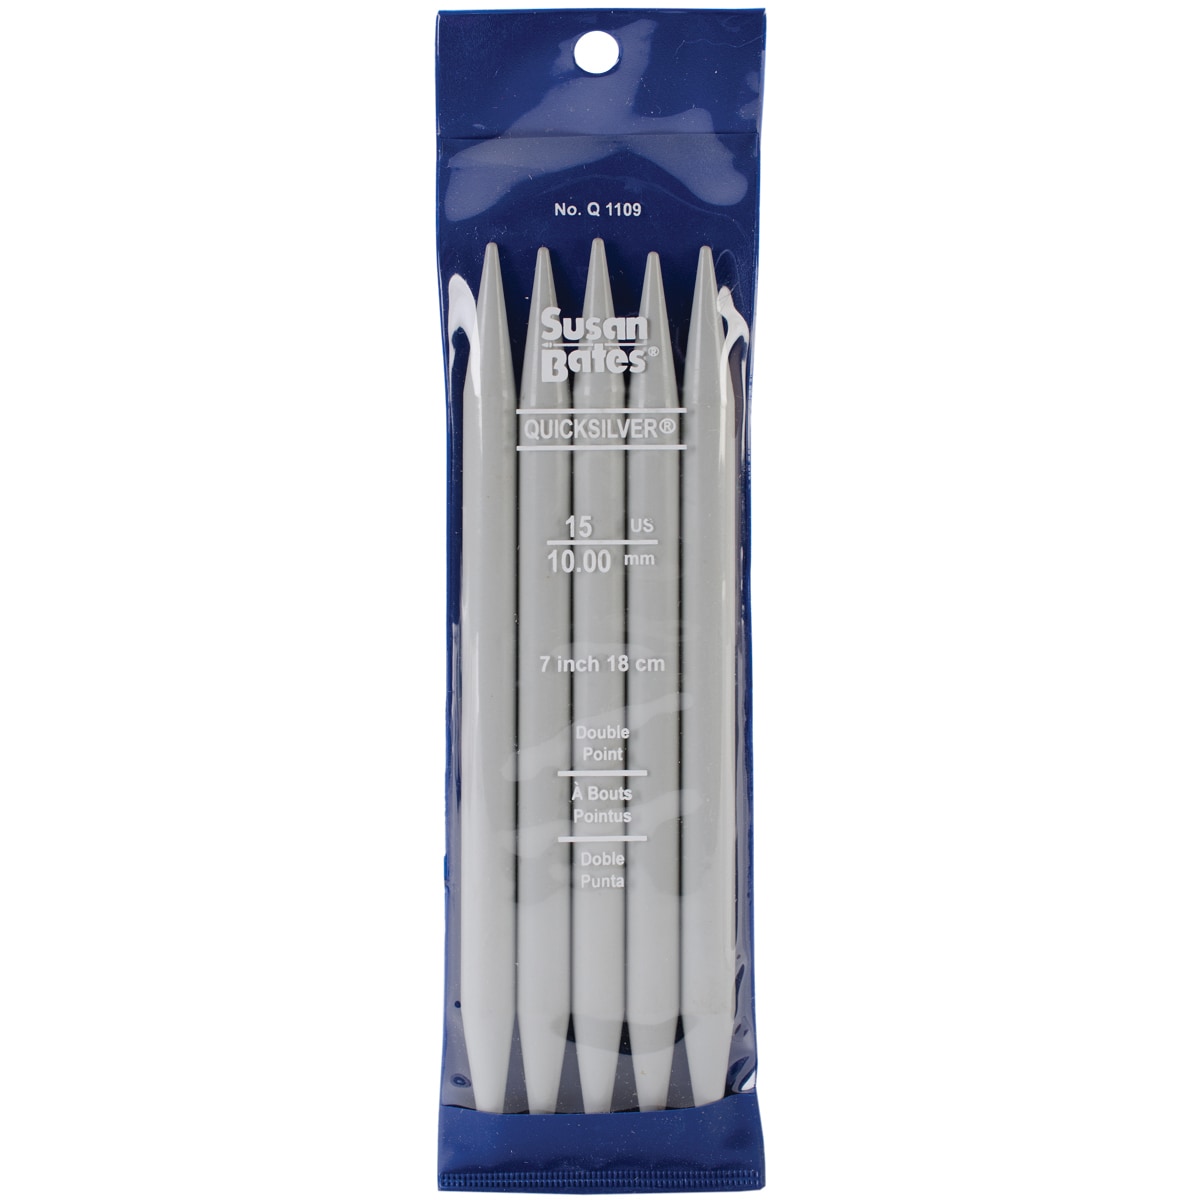 Quicksilver Double Point Knitting Needles 7 5/pkg size 15/10mm